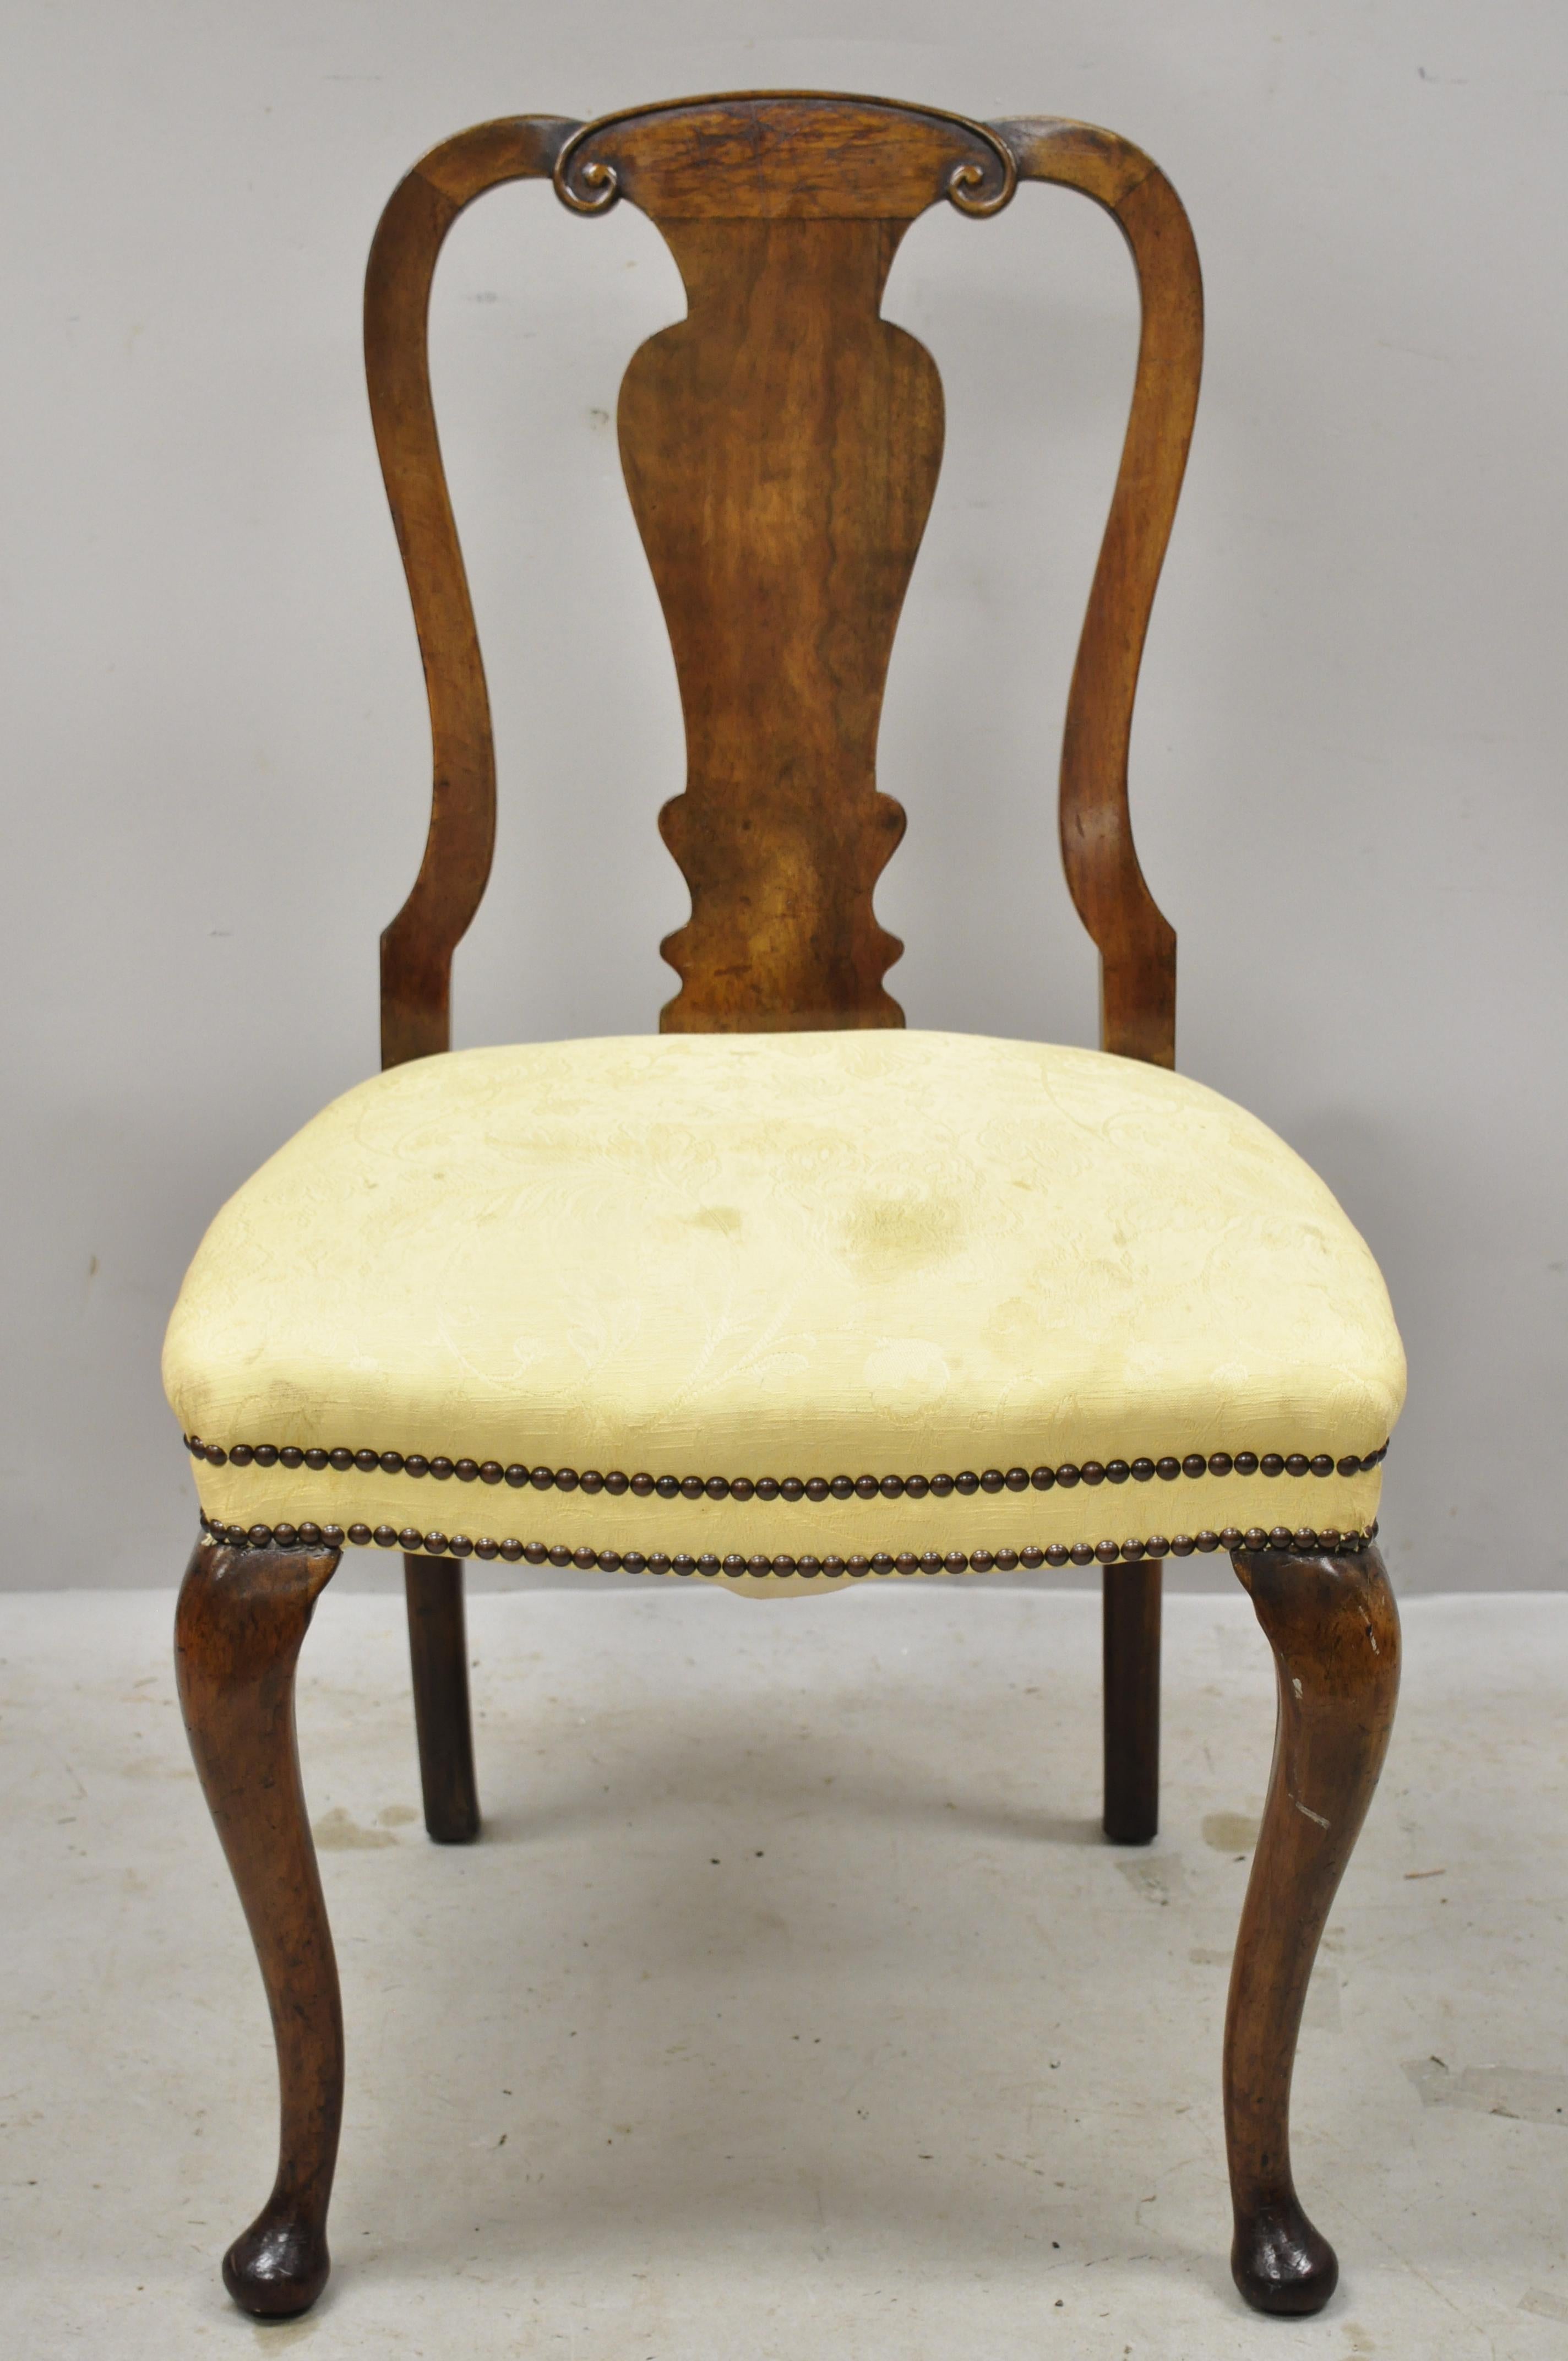 Antique 19th Century English Queen Anne Burr Walnut Splat Back Dining Side Chair For Sale 3